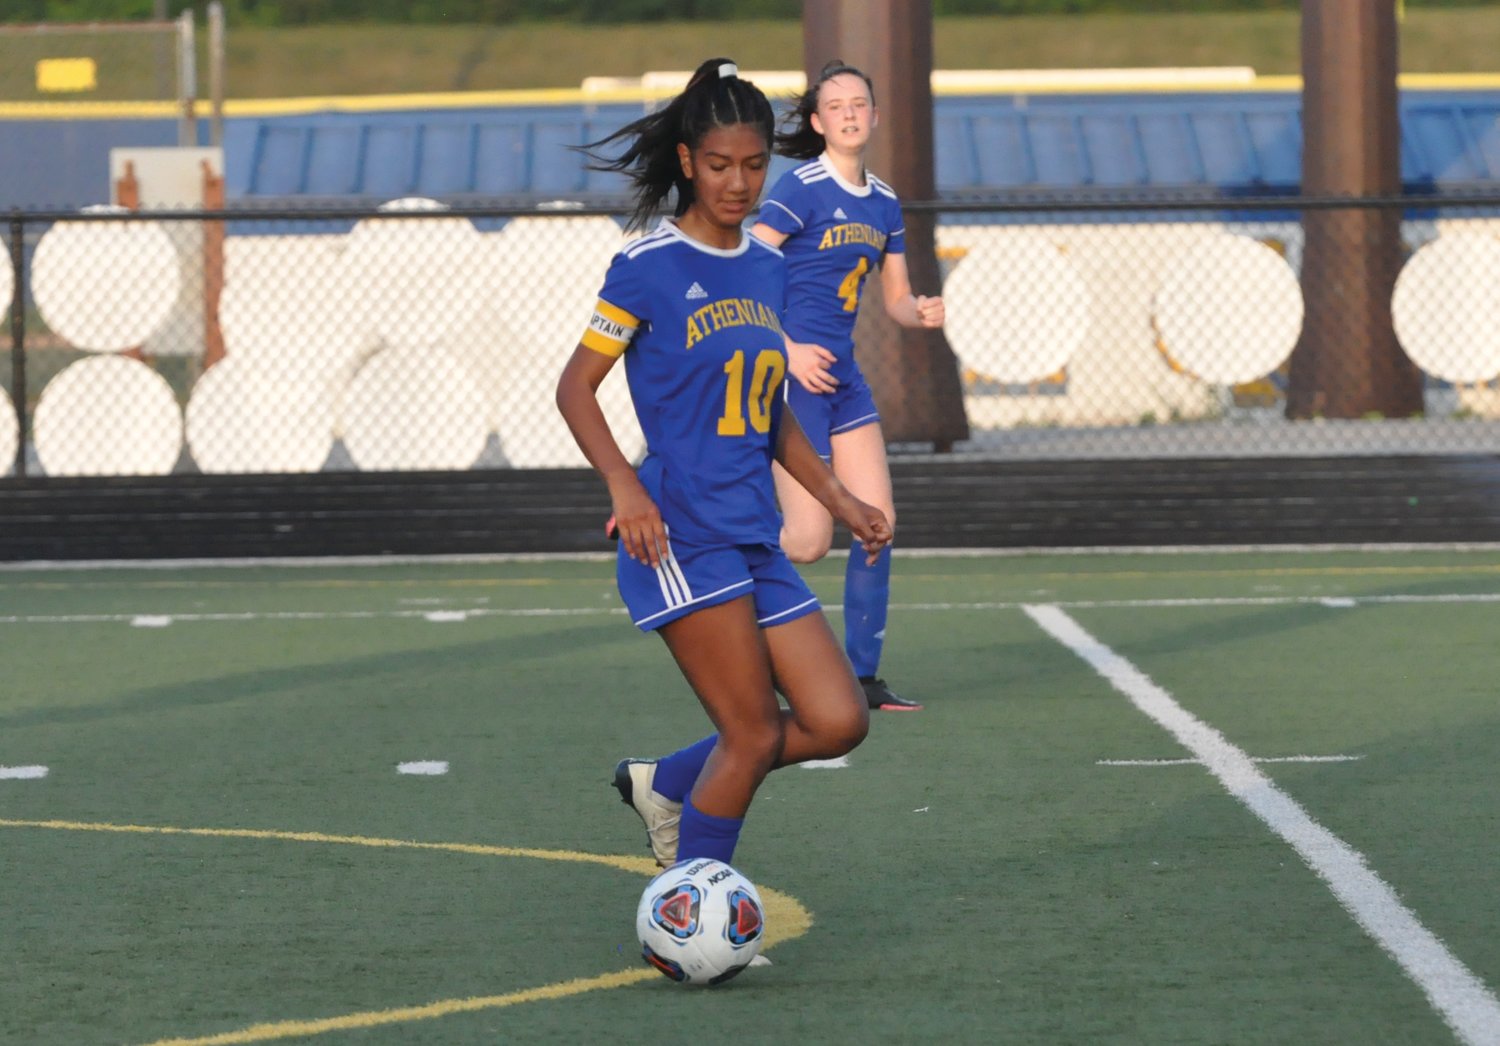 Crawfordsville's Hannia Hernandez controls the ball in the open field for the Athenians on Wednesday against Frankfort.